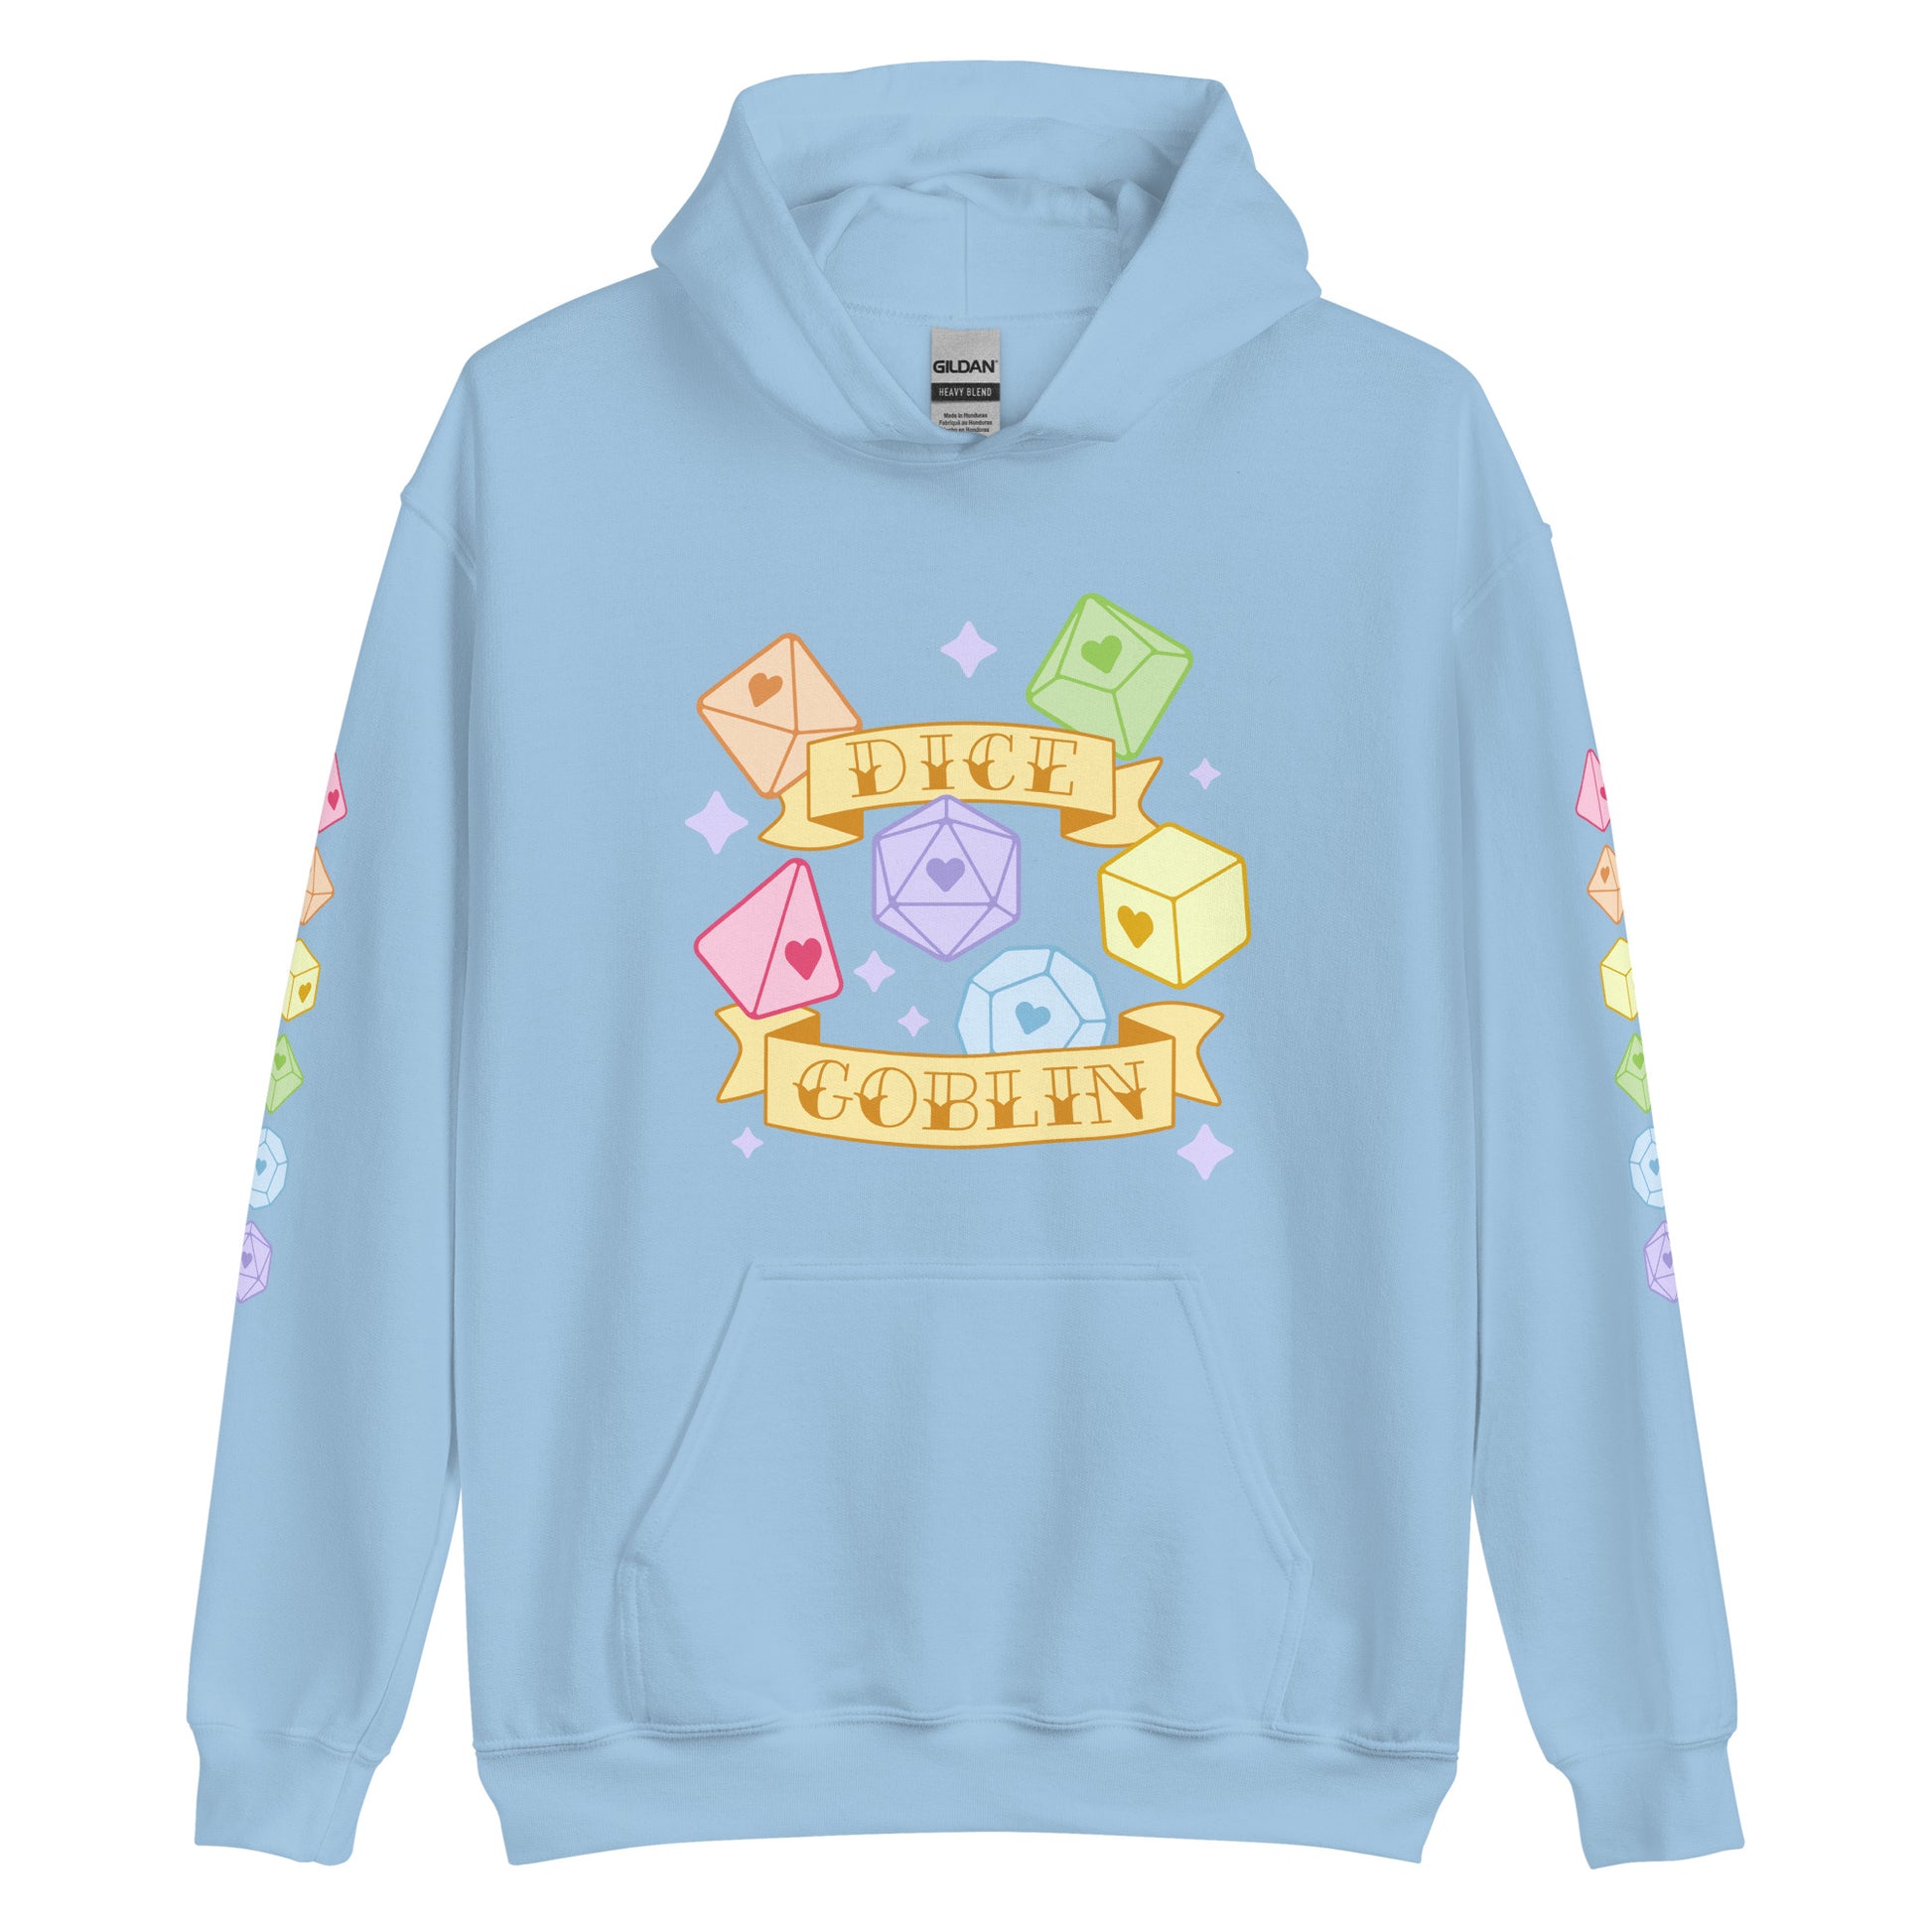 A light blue hooded sweatshirt featuring six polyhedral dice in pale rainbow colors. Two banners around the dice read "Dice Goblin". The sleeves are also decorated with a column of dice.